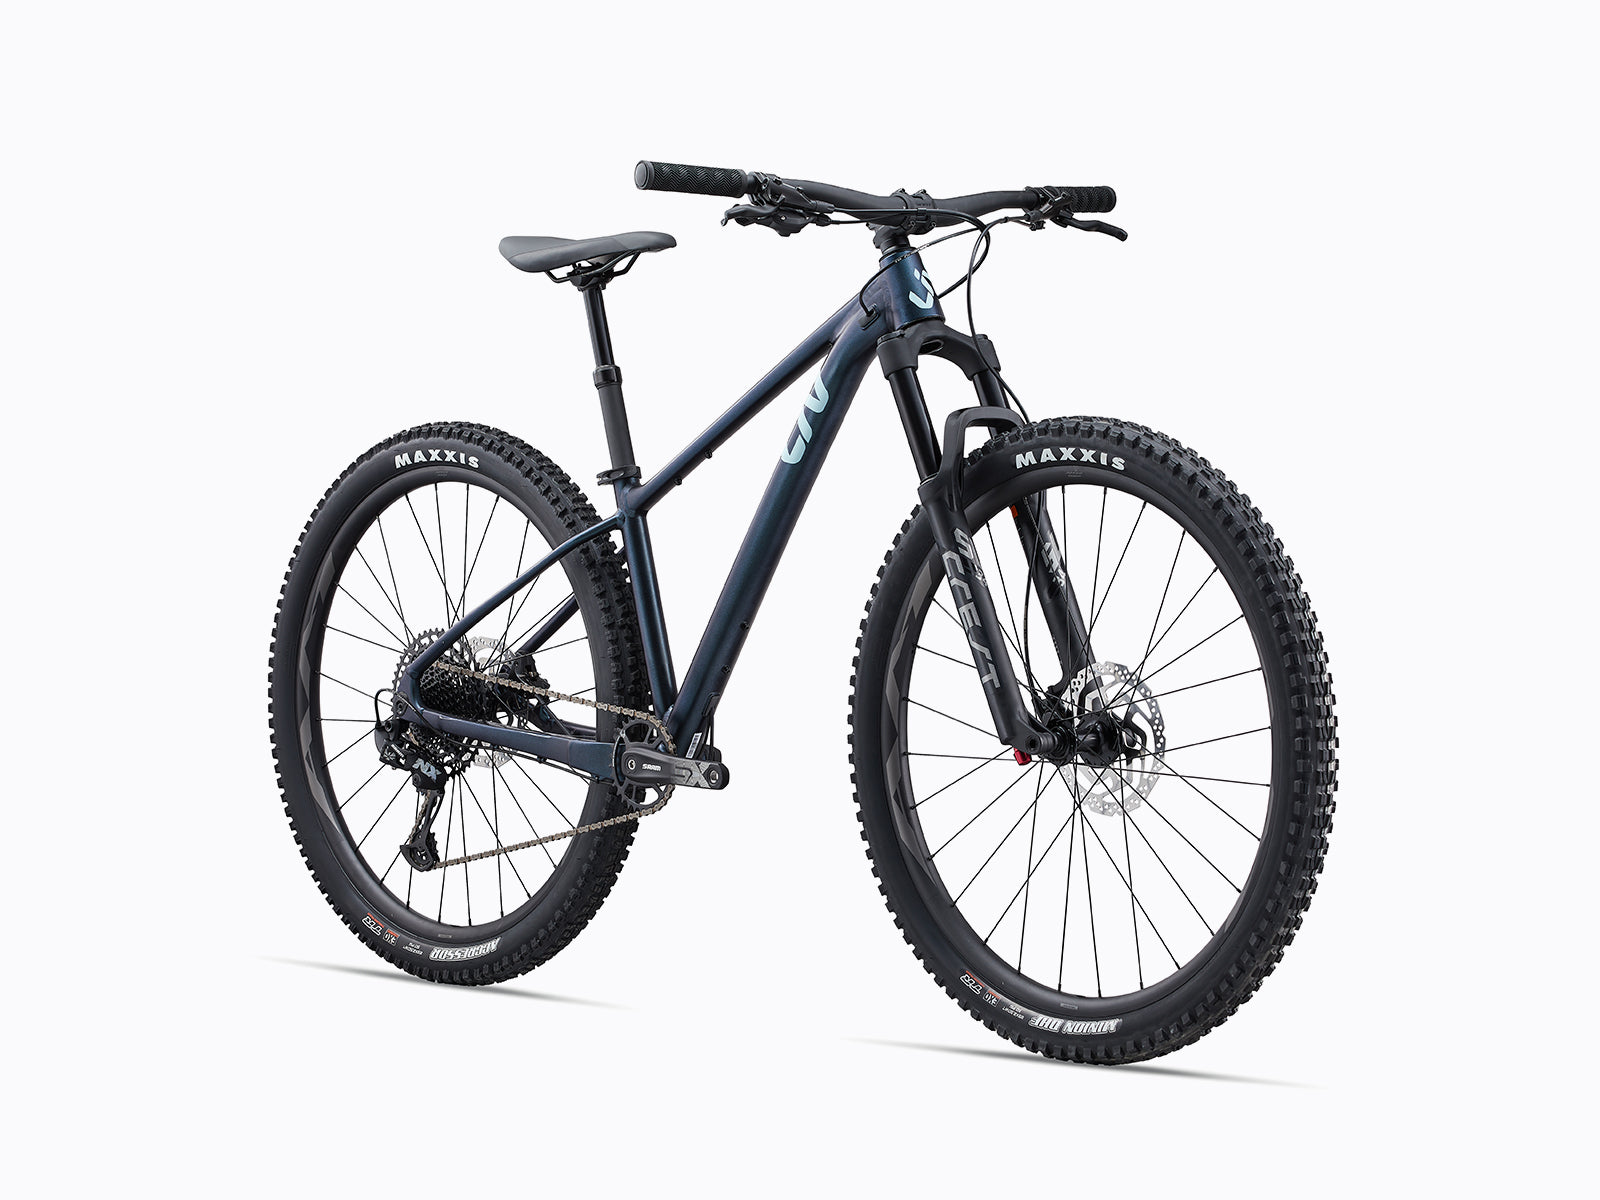 imge features a Liv Lurra 29 1 in starry night colour, sold by Giant Melbourne, Melbourne based bike shop with experienced mechanics..